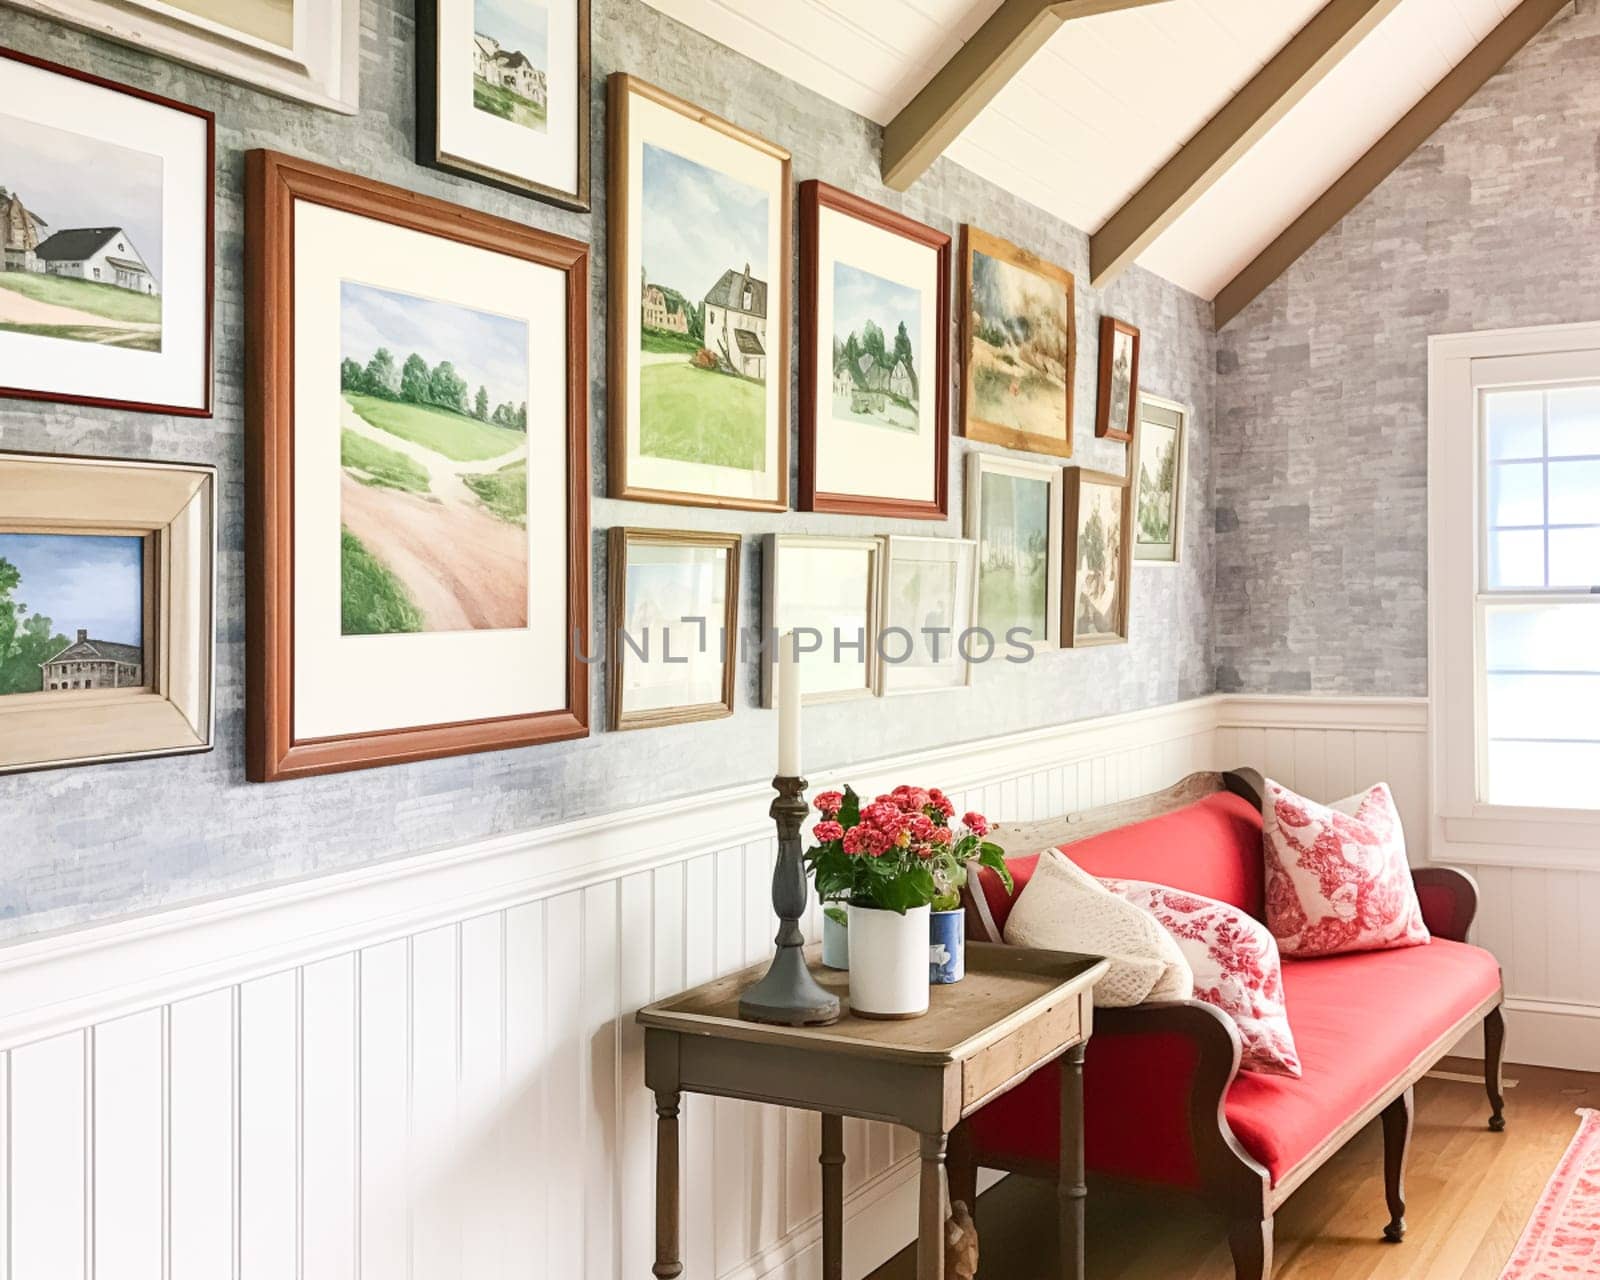 Gallery wall, home decor and wall art, framed art in modern English country cottage interior, living room for diy printable artwork and print shop idea